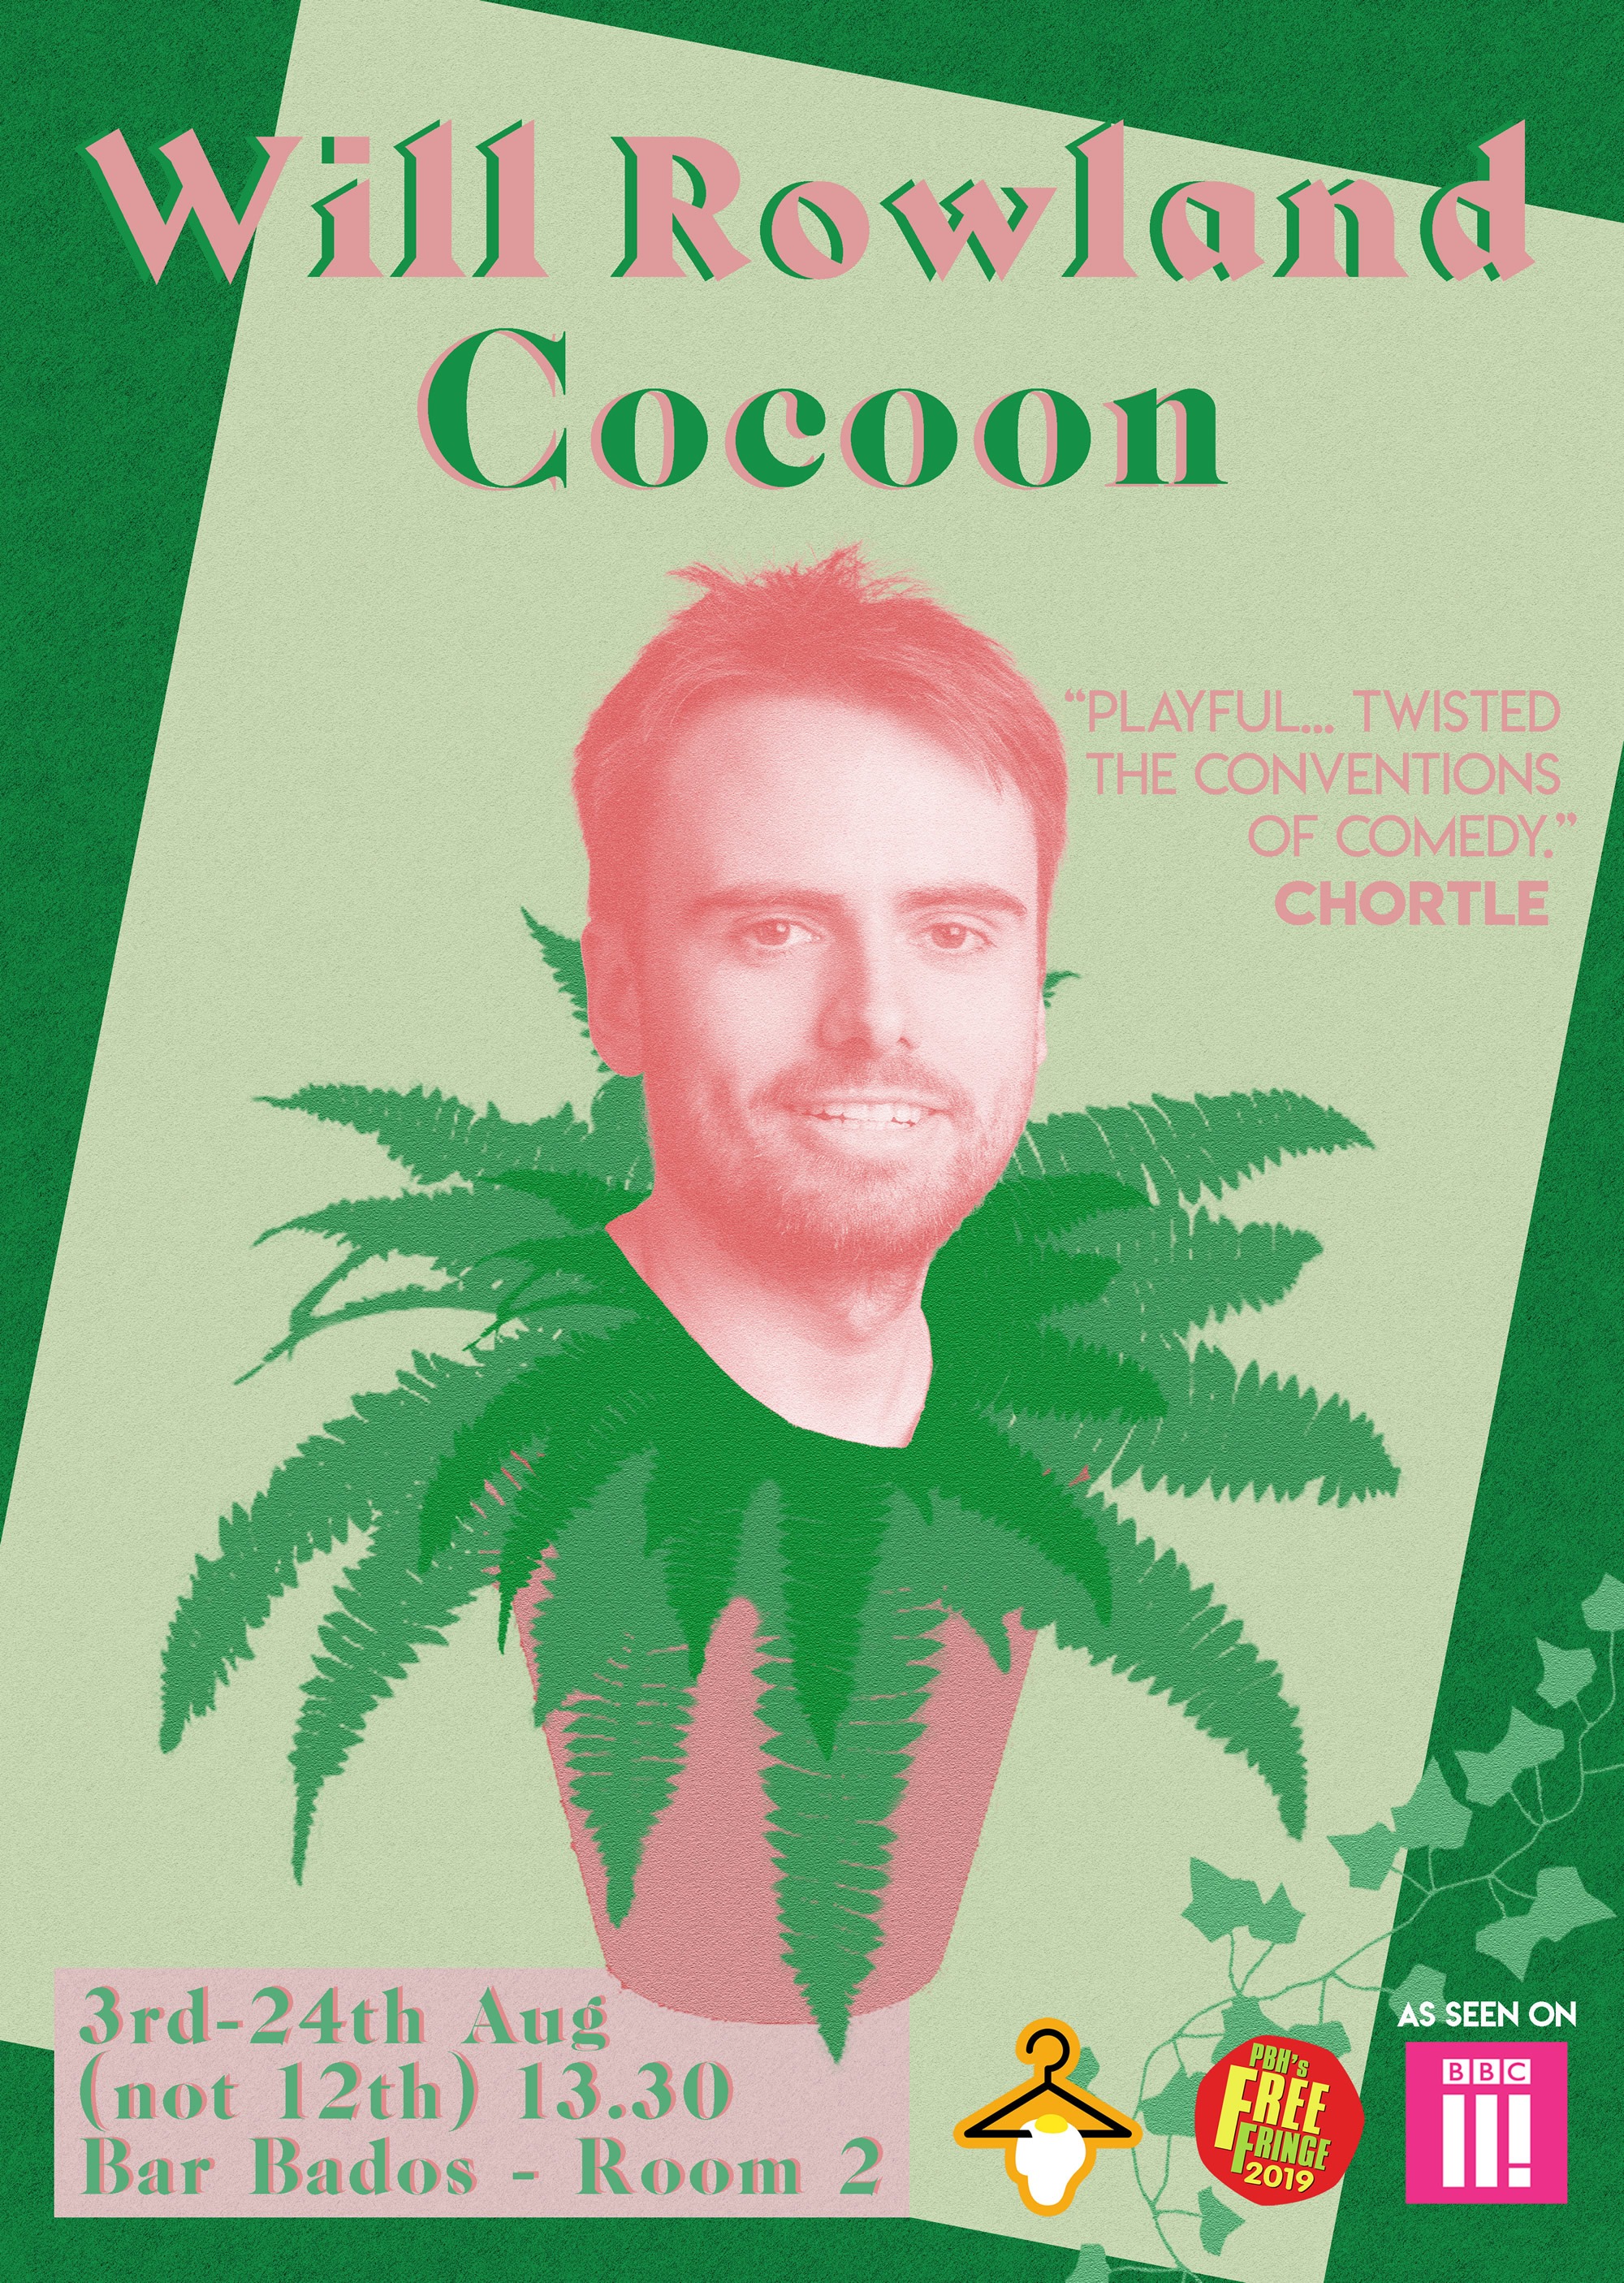 The poster for Will Rowland: Cocoon